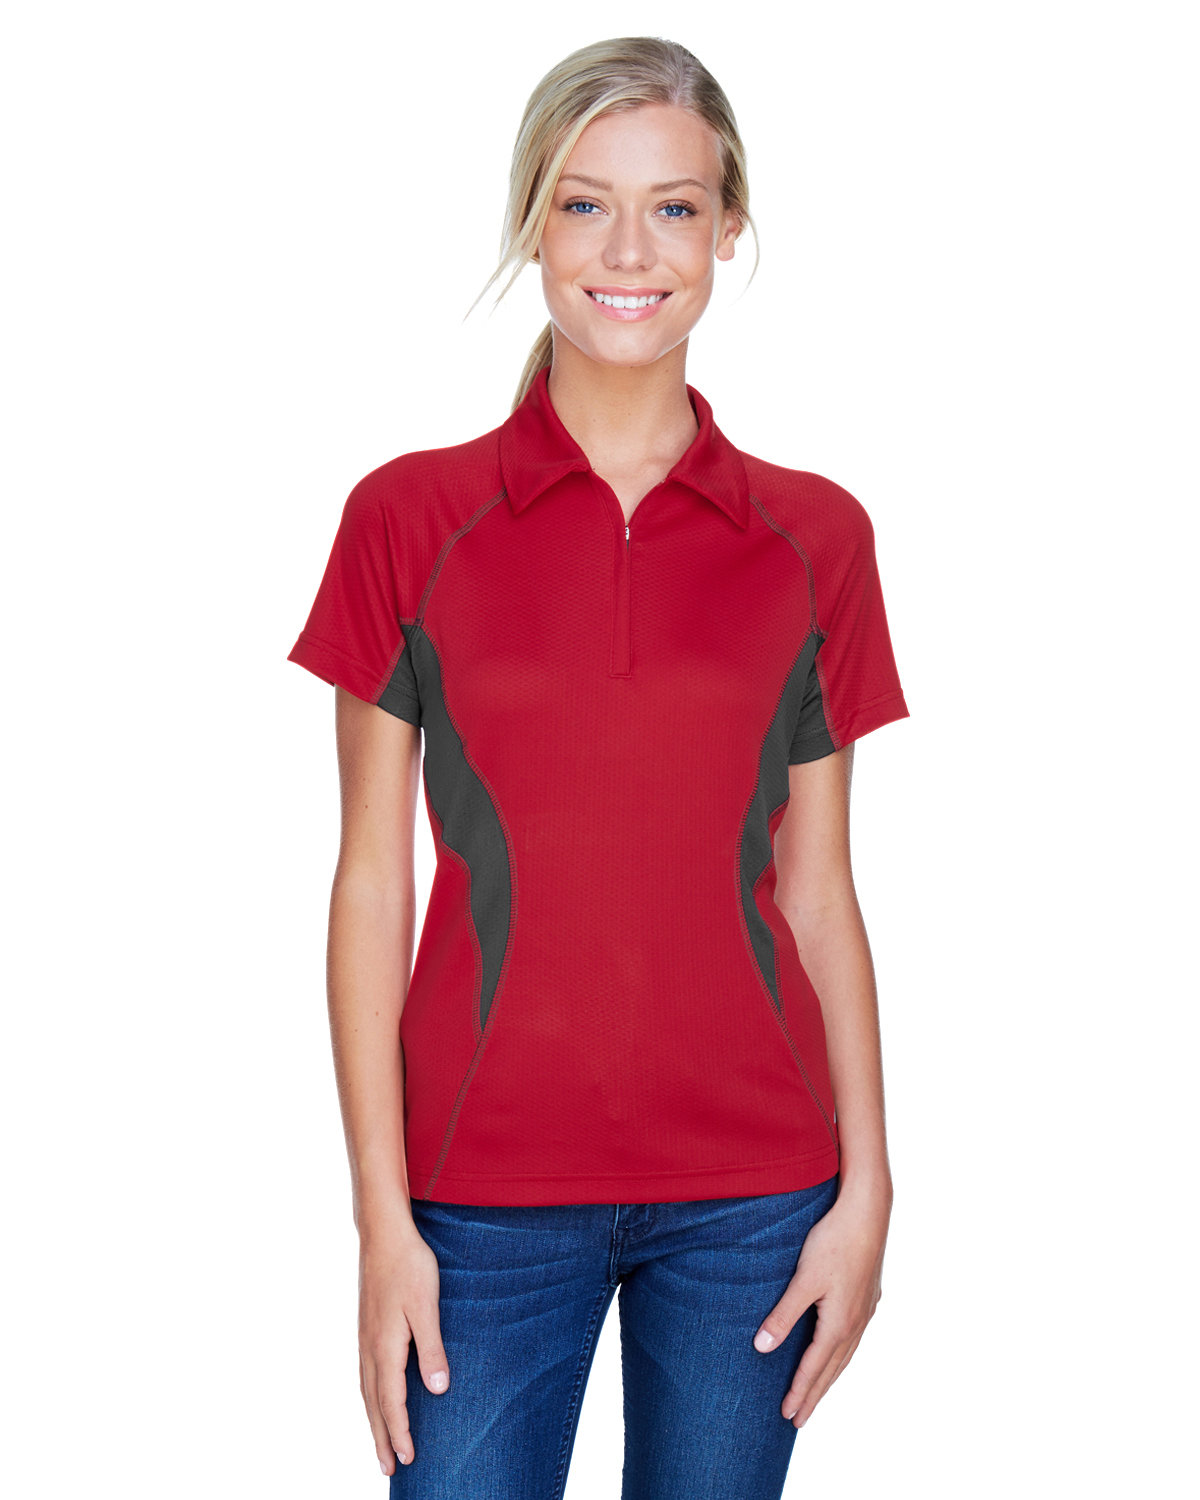 click to view Olympic Red w/Black Silk